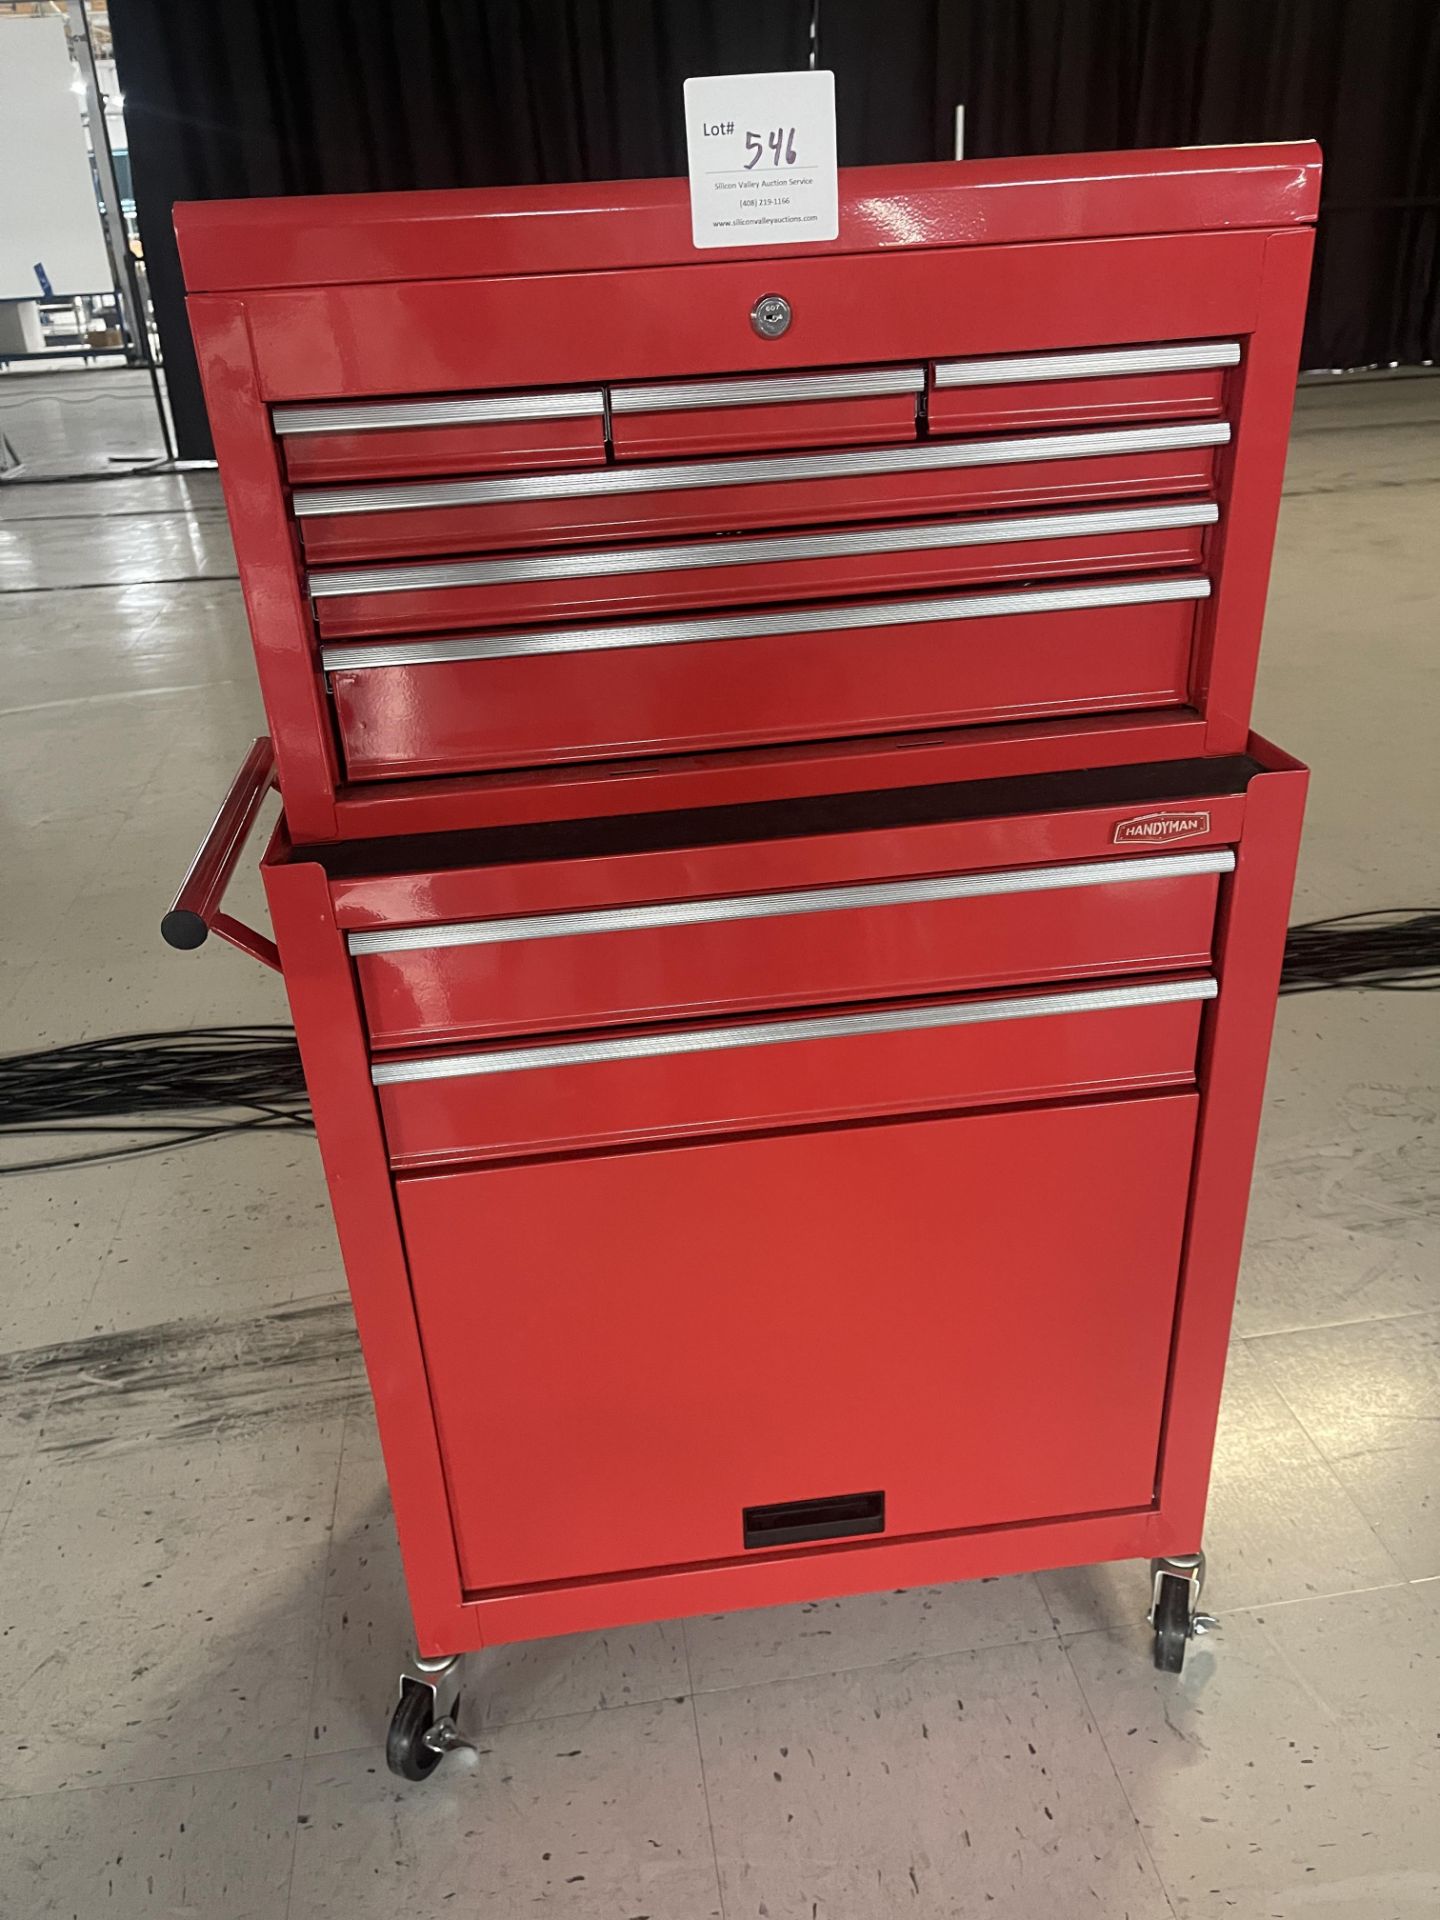 Handyman red metal tool box/chest and cart 24 1/2" wide x 13" deep x 24" high